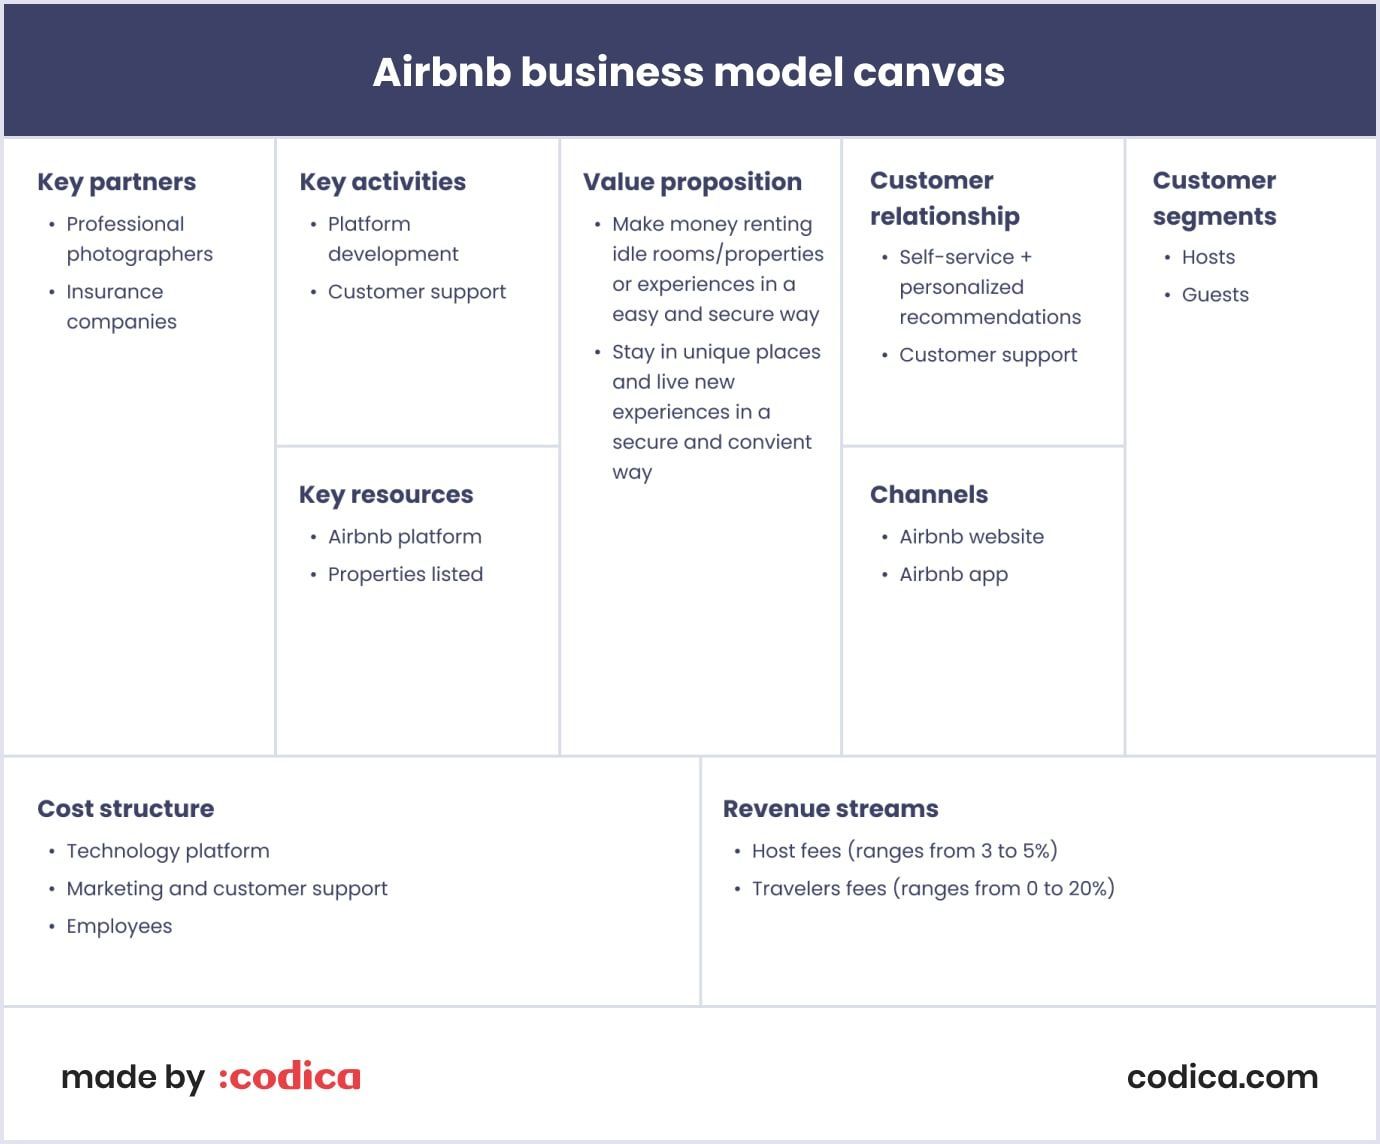 Airbnb business model canvas